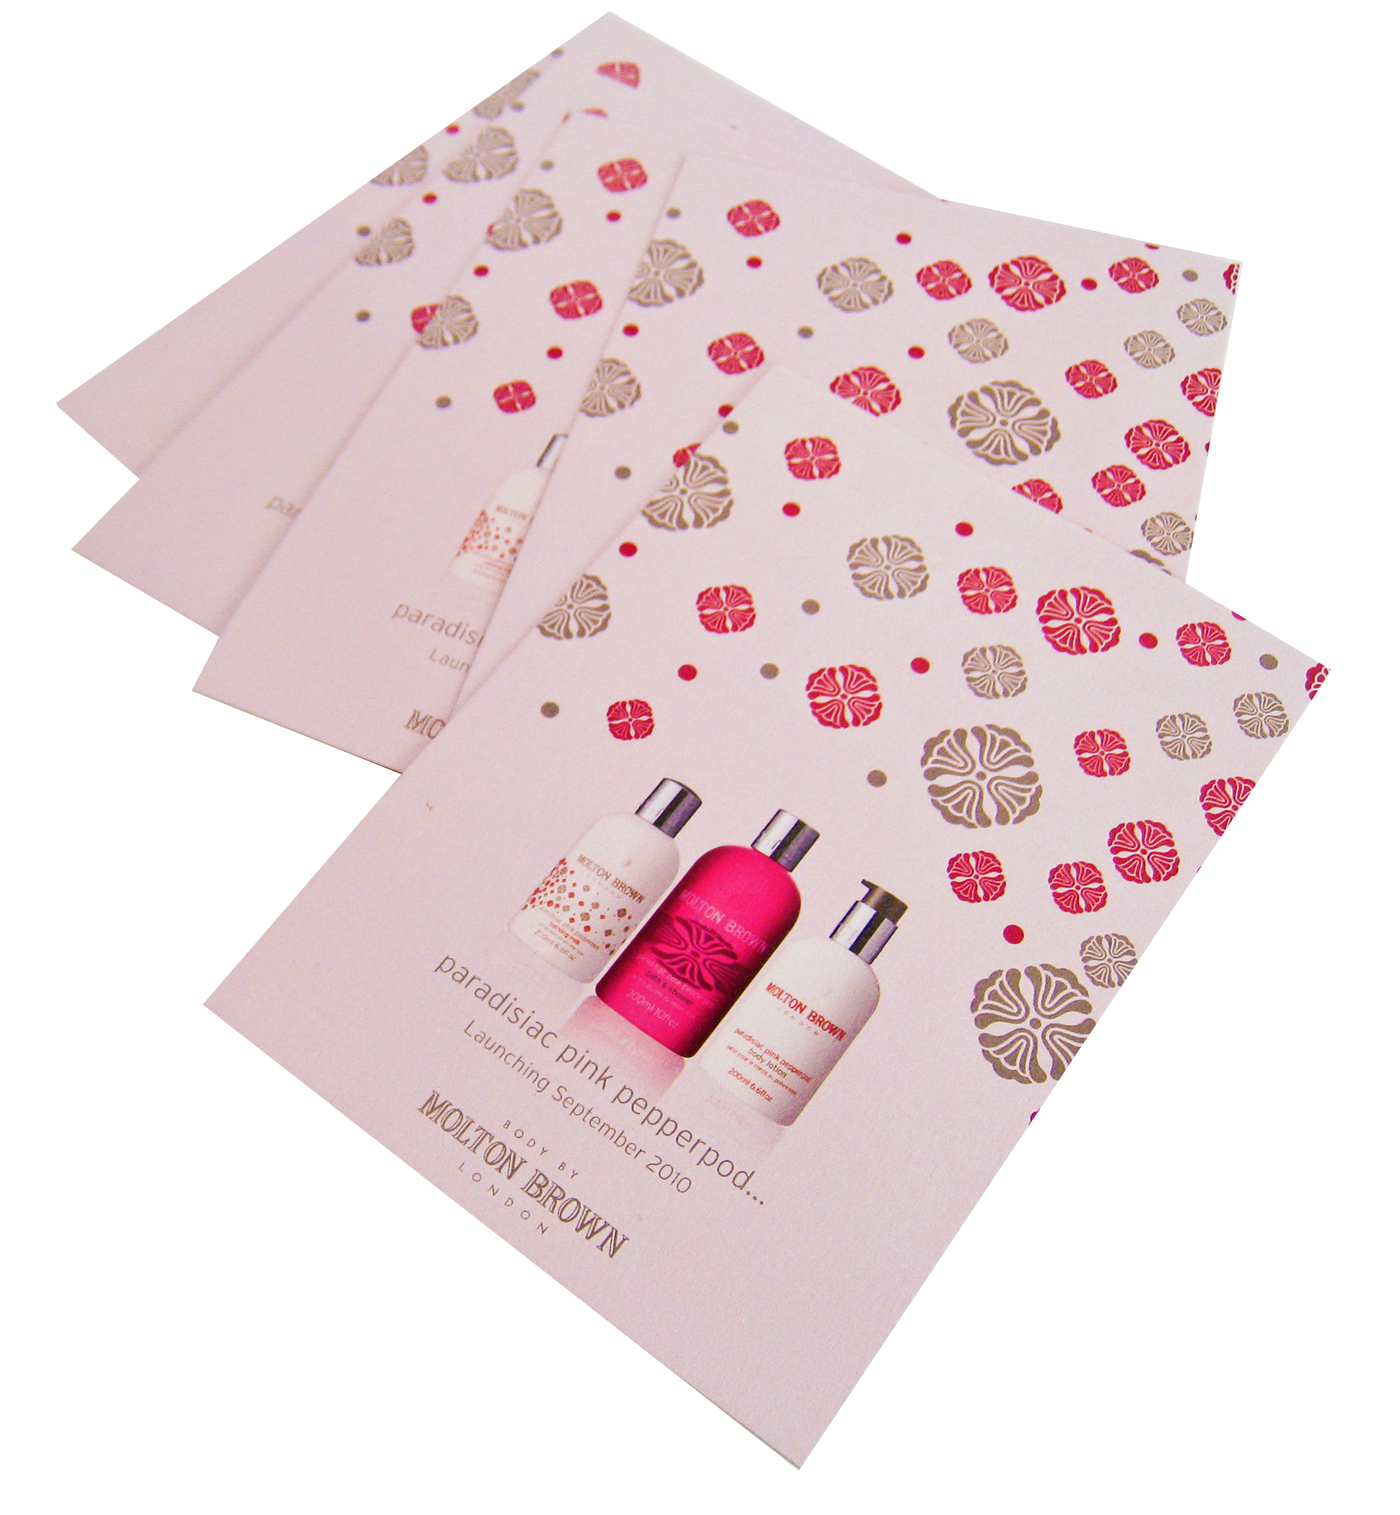 printed flyers for beauty retailer